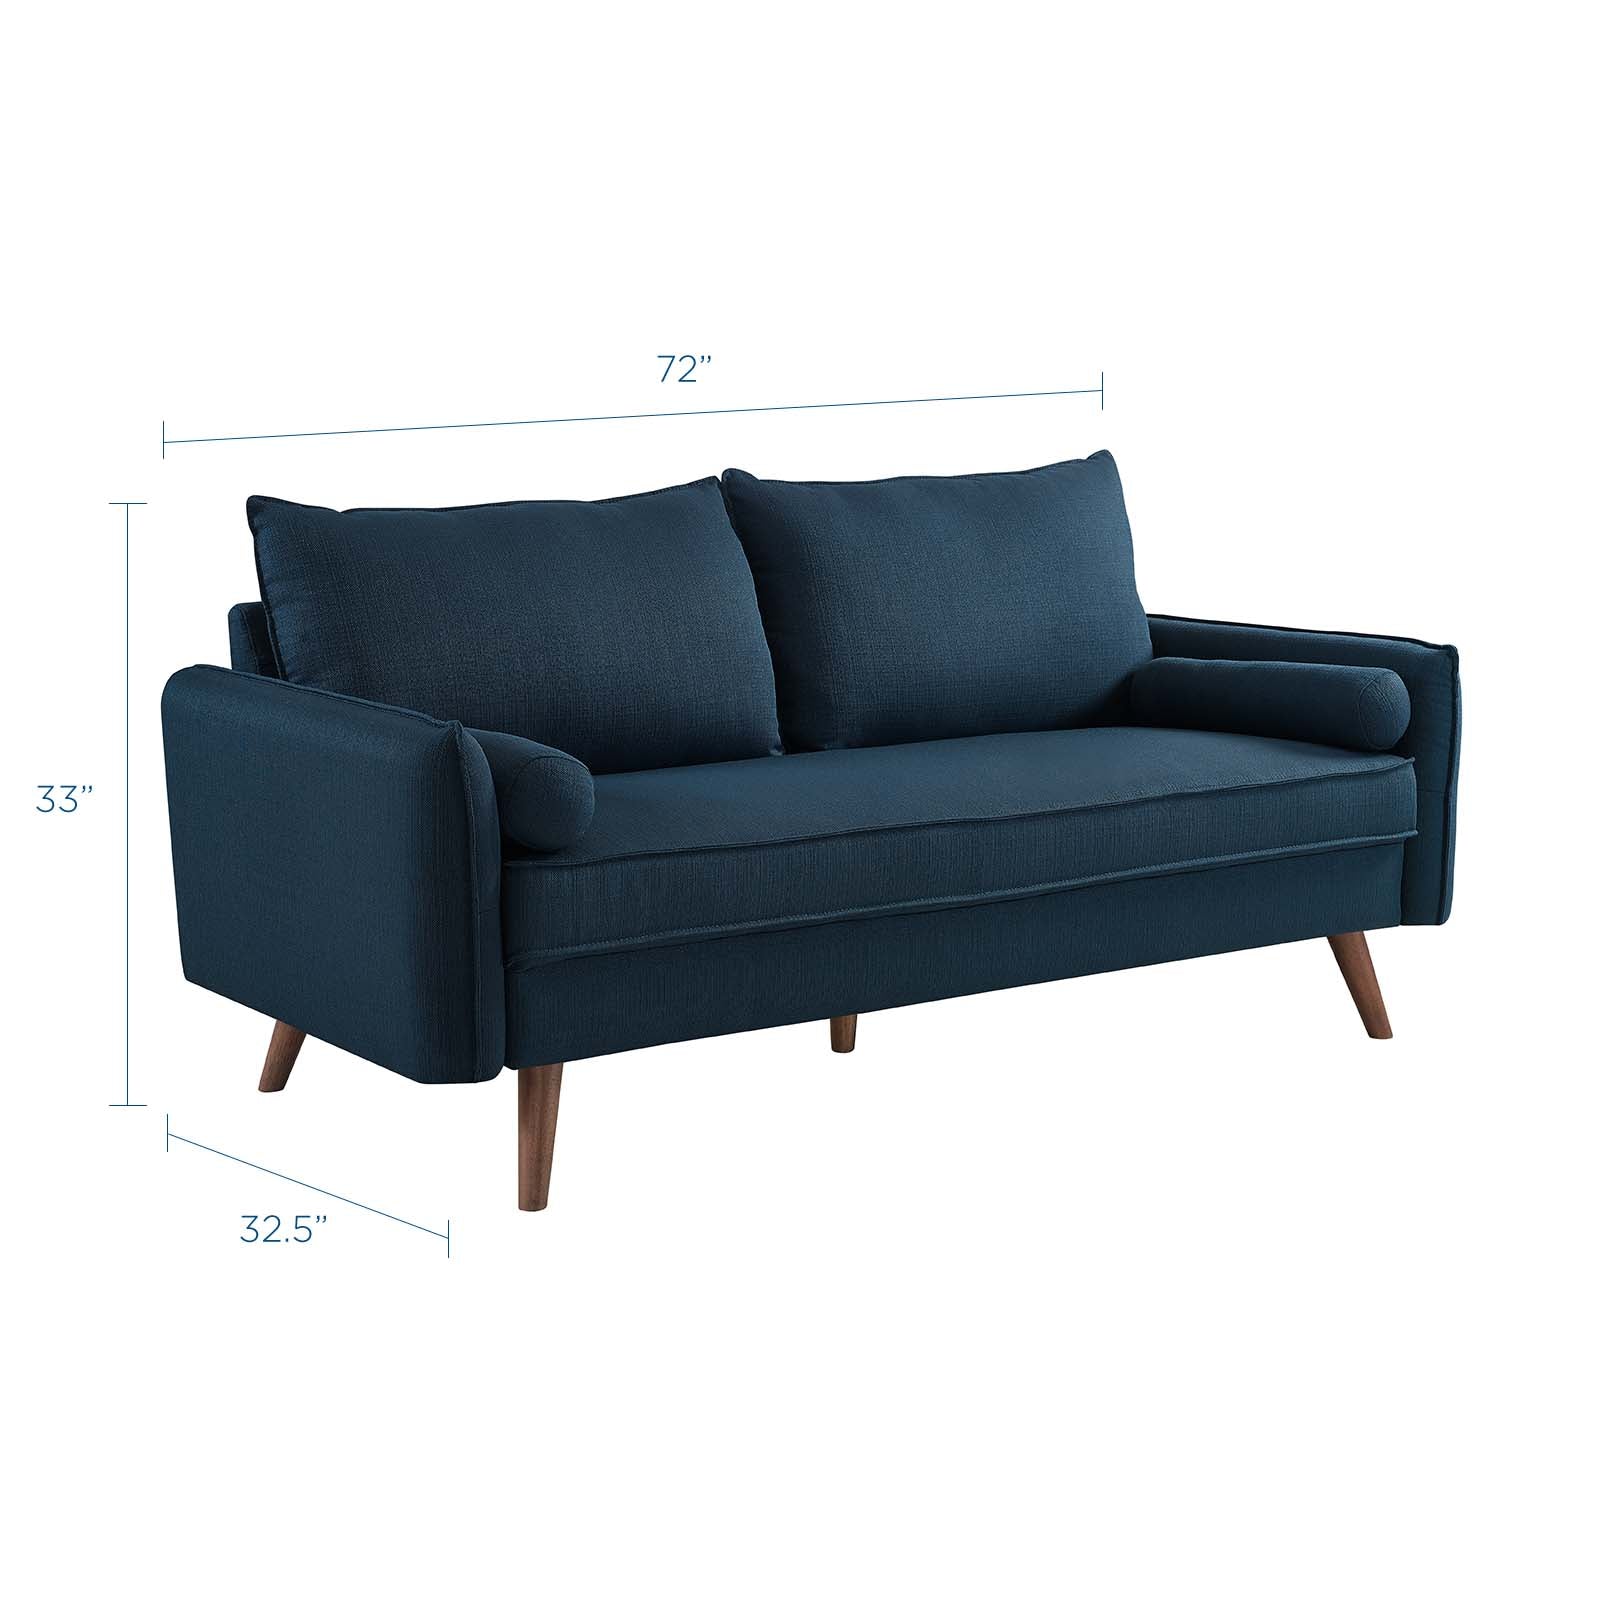 Modway Sofas & Couches - Revive Upholstered Fabric Sofa Azure